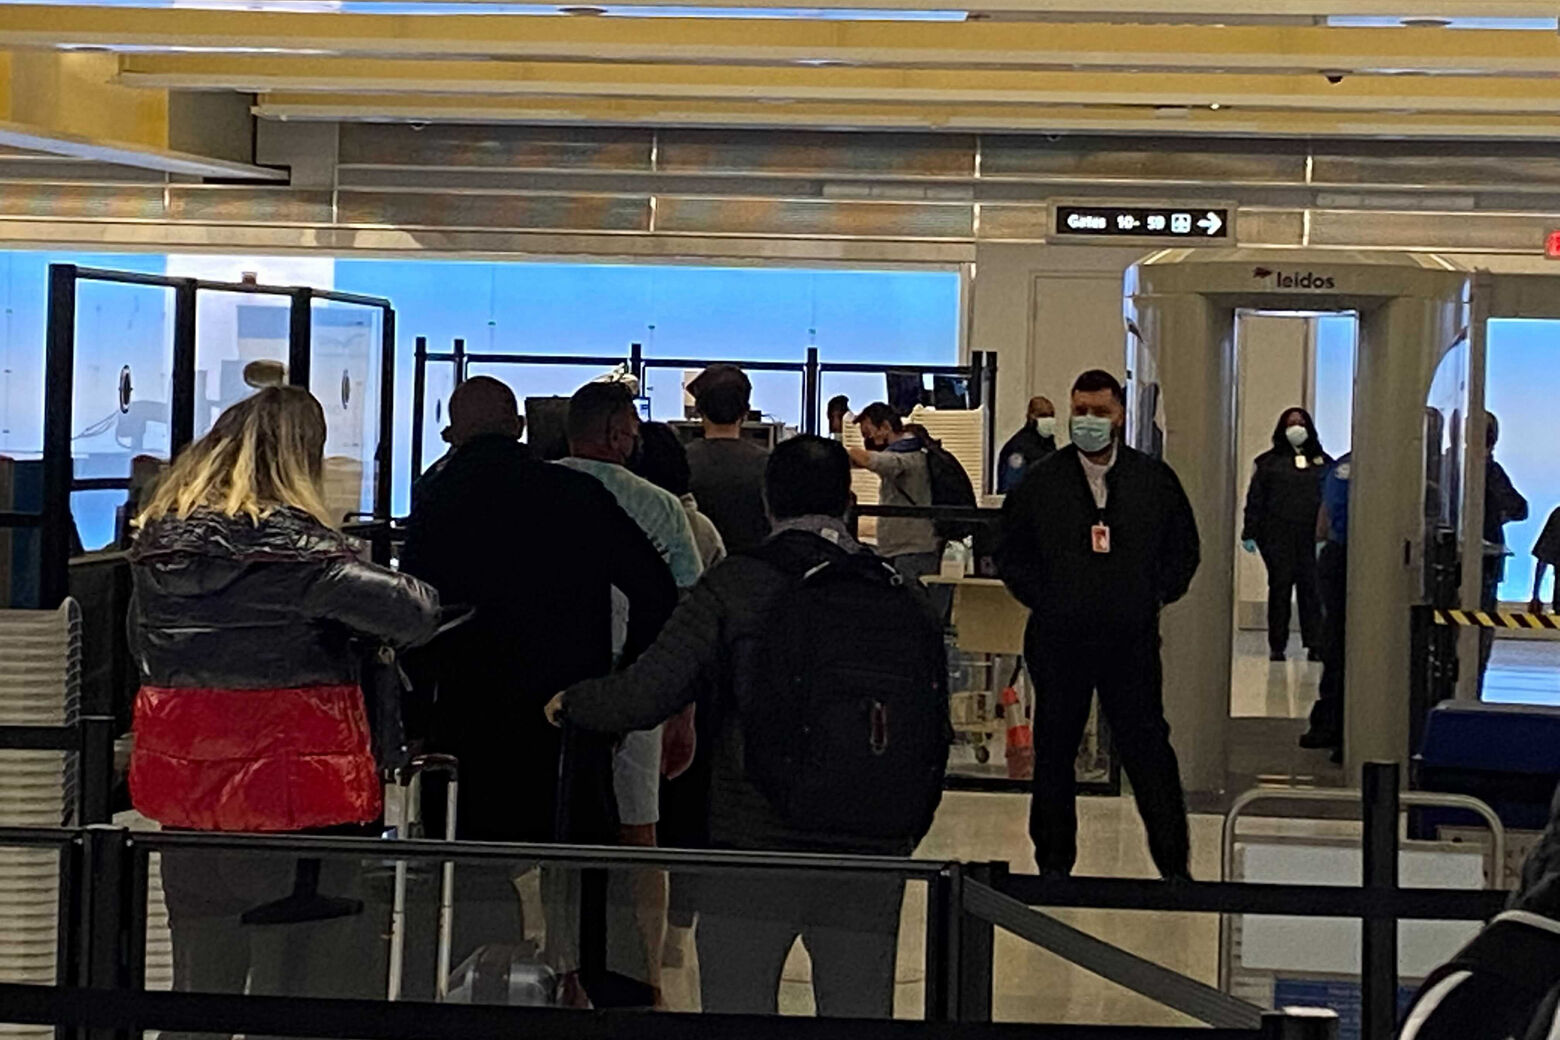 People wait in line at security at Reagan National Airport on Nov. 9, 2021. (WTOP/John Domen)